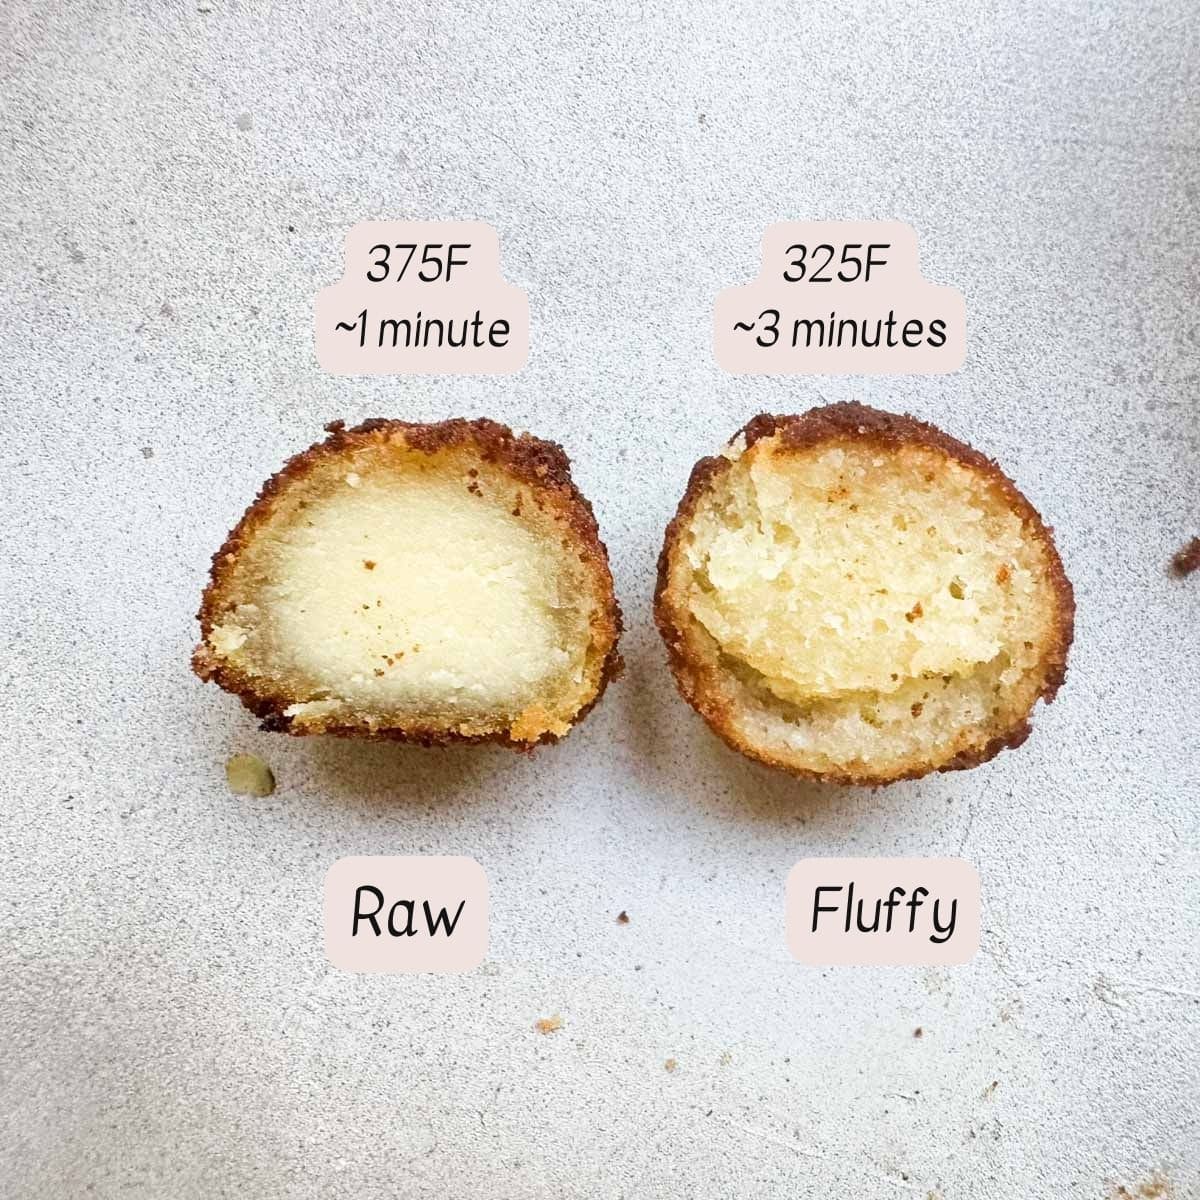 Infographic showing a cross section of gulab jamun on the left that was cooked at 400F for ~1 minute that is raw in the center and one that was cooked at 325F for 3 minutes that is fluffy on the inside.